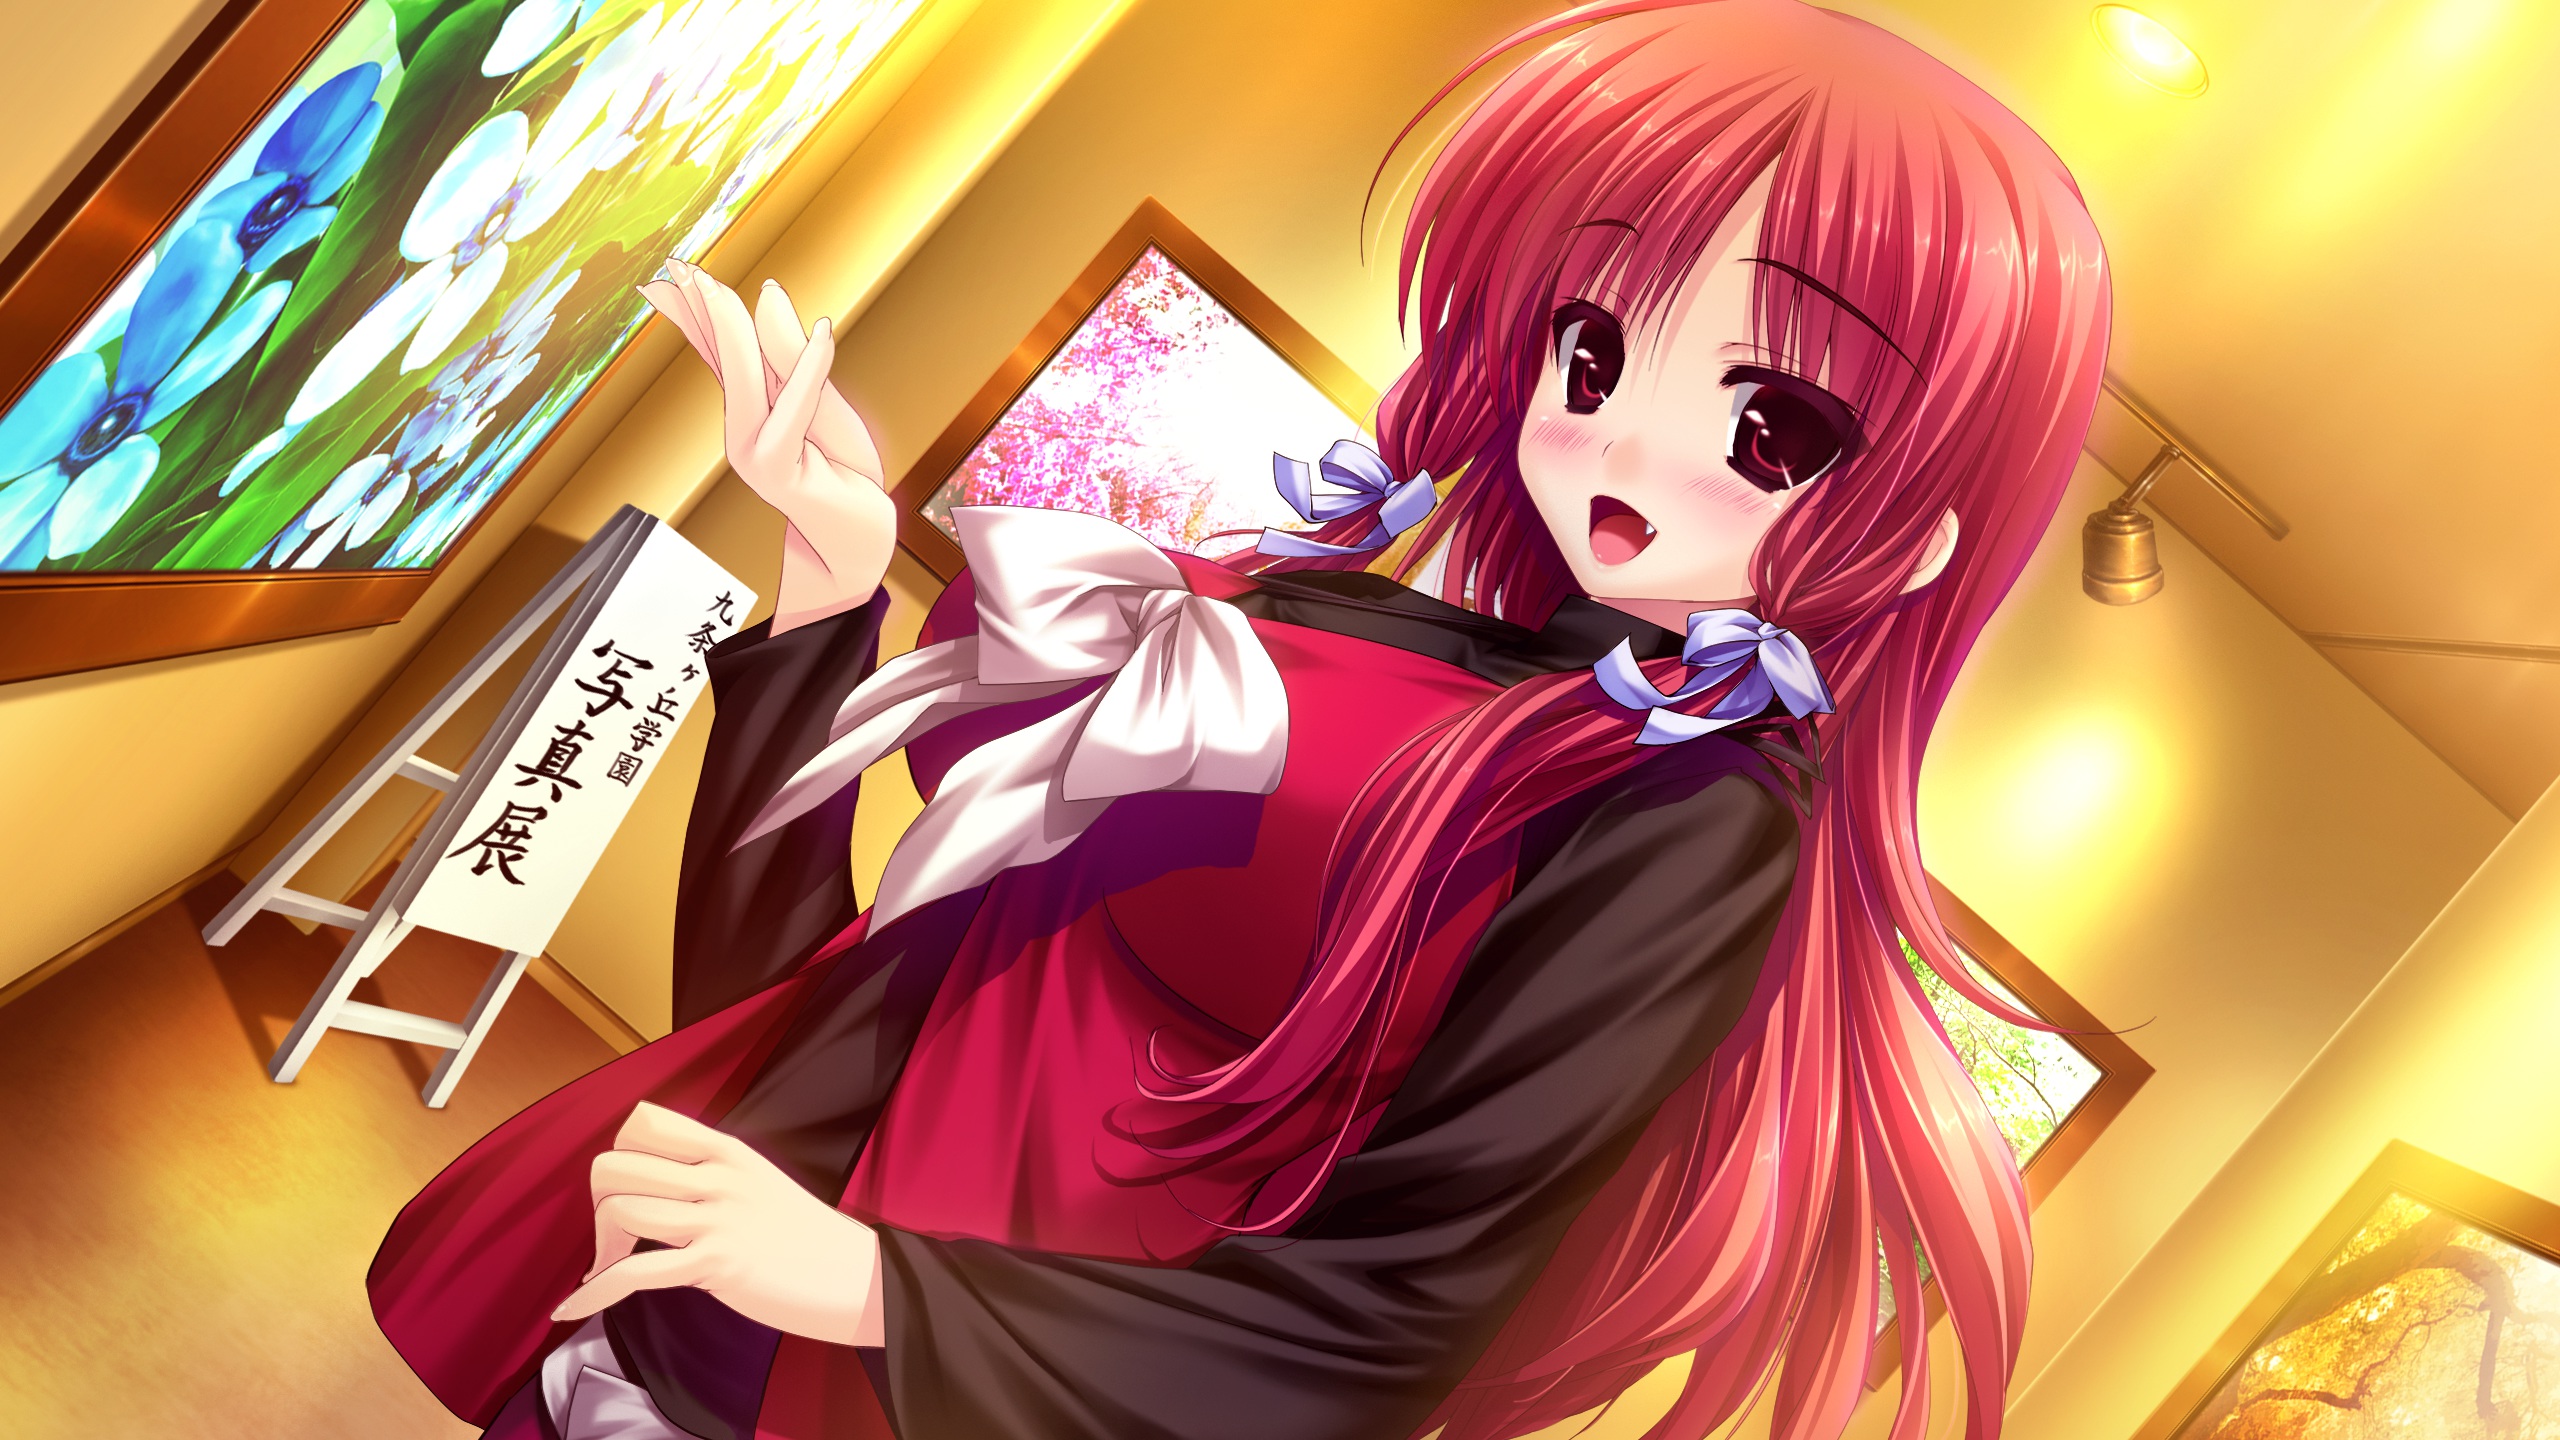 prism, Recollection, Clochette, Fang, Game, Cg, Long, Hair, Prism, Recollection, Red, Hair, Renjou, Sayaka, Shintaro Wallpaper